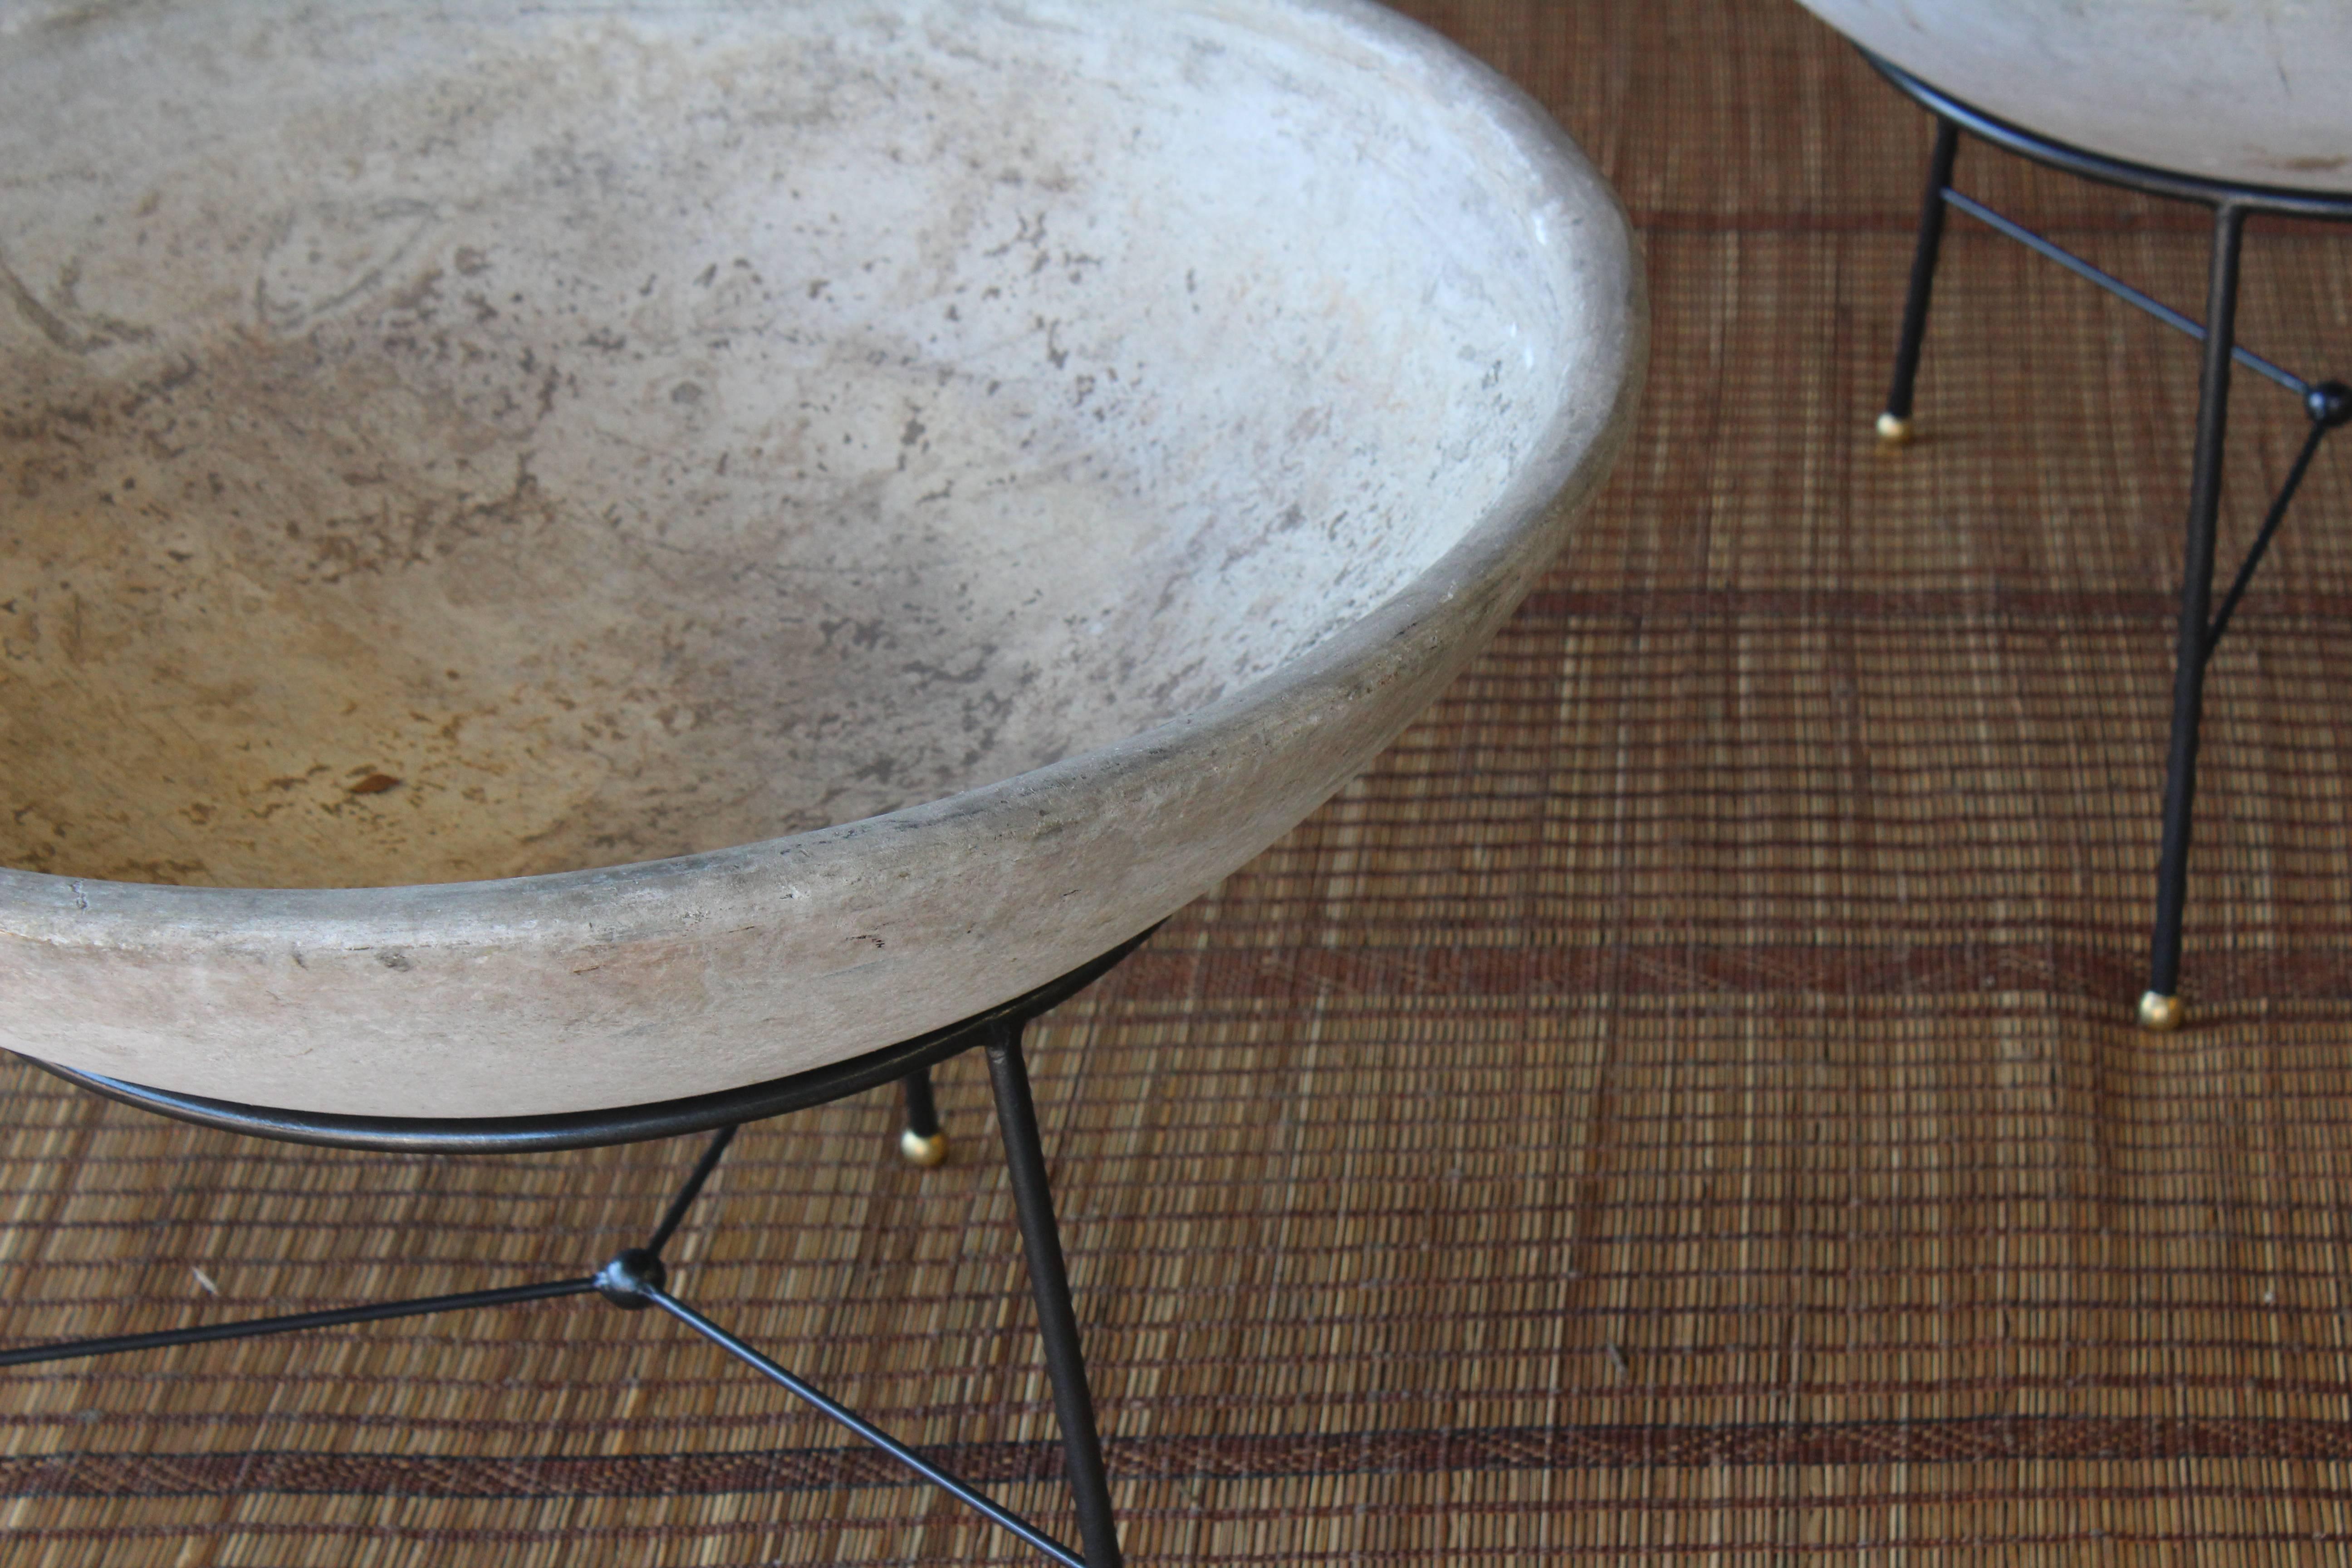 Cement and fiberglass saucer planter designed by Willy Guhl & produced in Switzerland in the 1950s by Eternit. Features a custom-made steel stand with solid brass capped feet. Suitable for indoor or outdoor use. Excellent condition with no cracks or